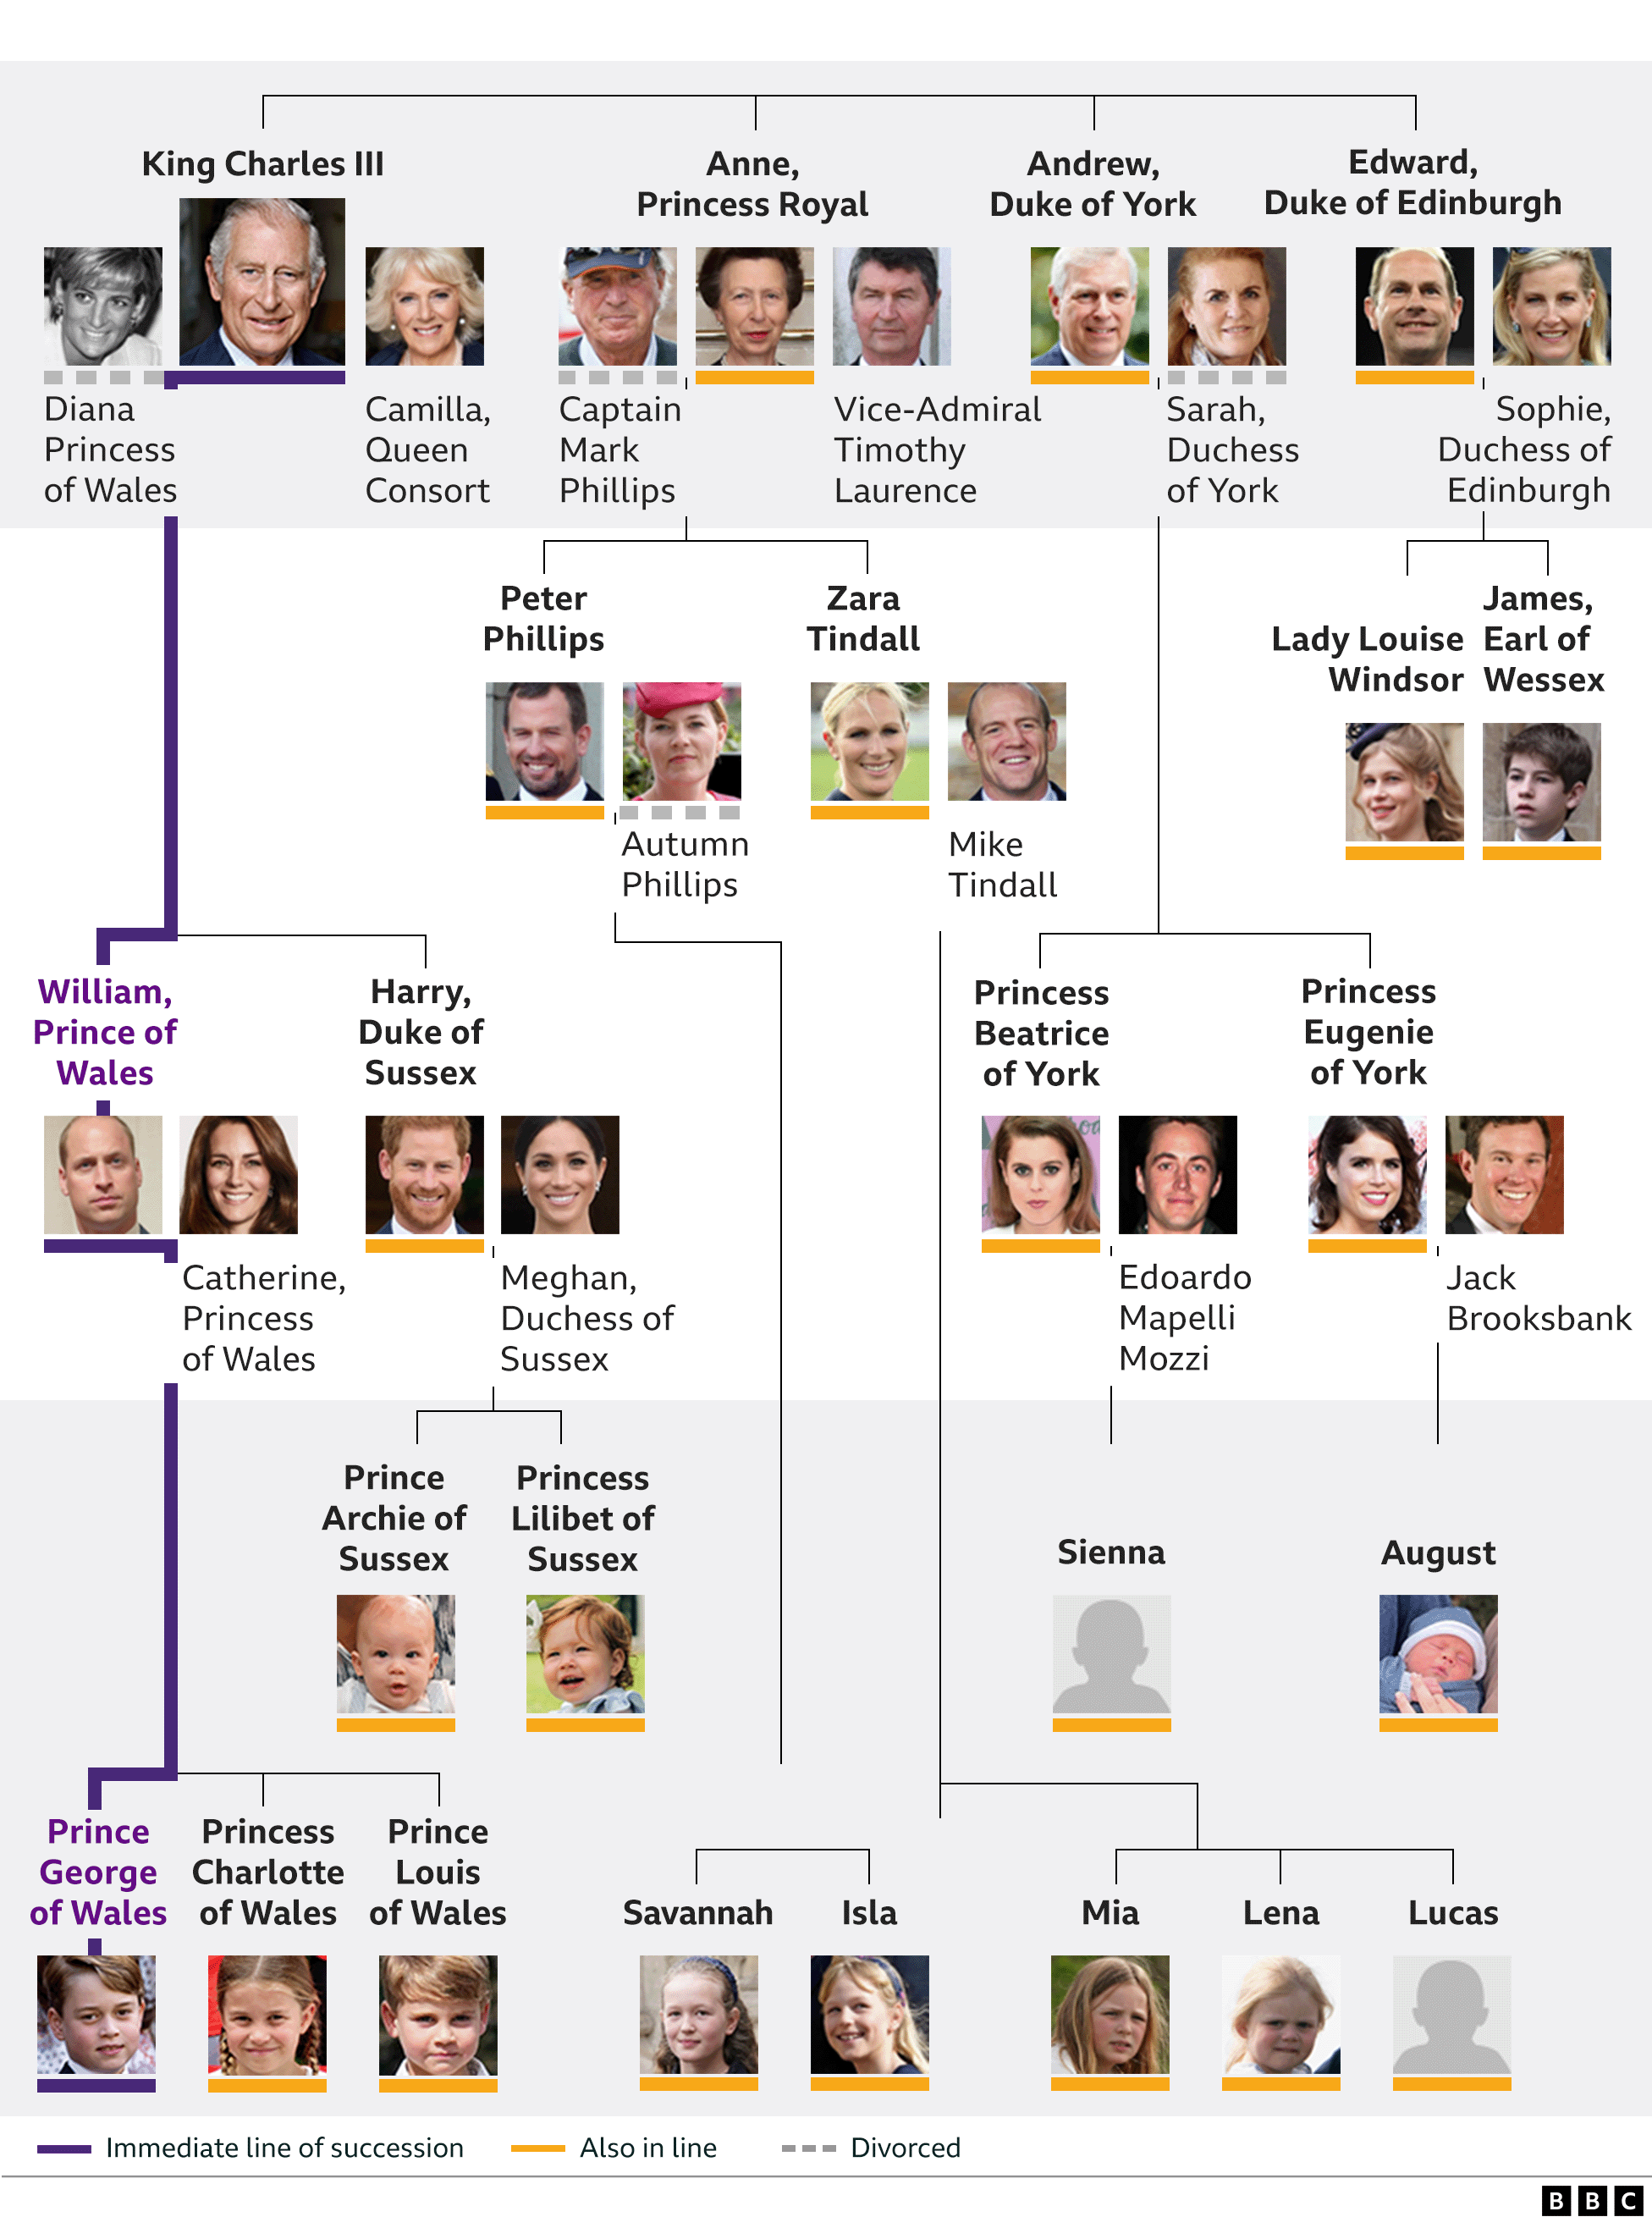 A family tree graphic showing Queen Elizabeth II’s children Charles, Anne, Andrew and Edward and their families. It also shows the line of succession from King Charles III to his son William and grandson George